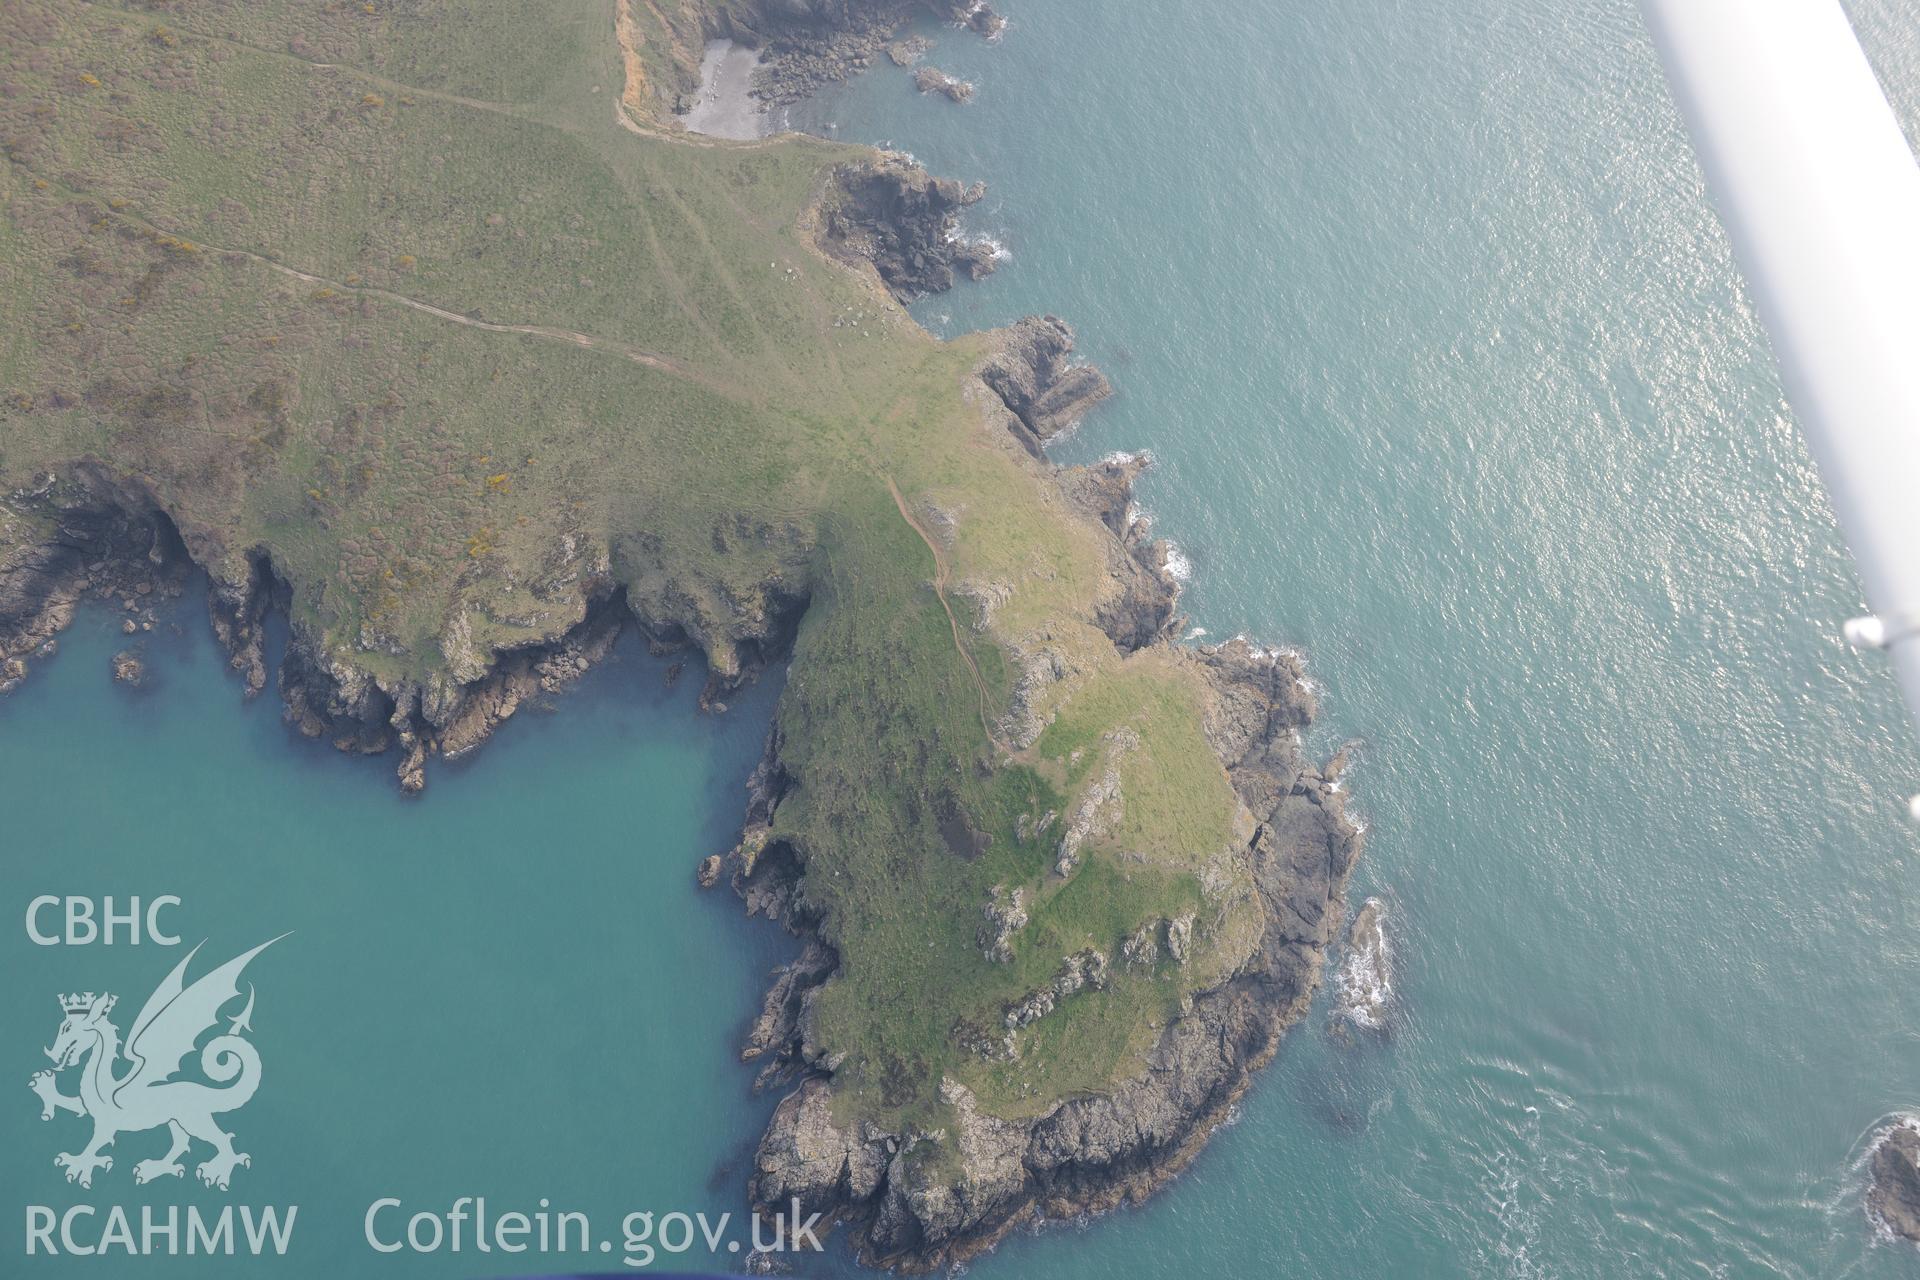 Royal Commission aerial photograph of Wooltack point promontory enclosure taken on 27th March 2017. Baseline aerial reconnaissance survey for the CHERISH Project. ? Crown: CHERISH PROJECT 2017. Produced with EU funds through the Ireland Wales Co-operation Programme 2014-2020. All material made freely available through the Open Government Licence.